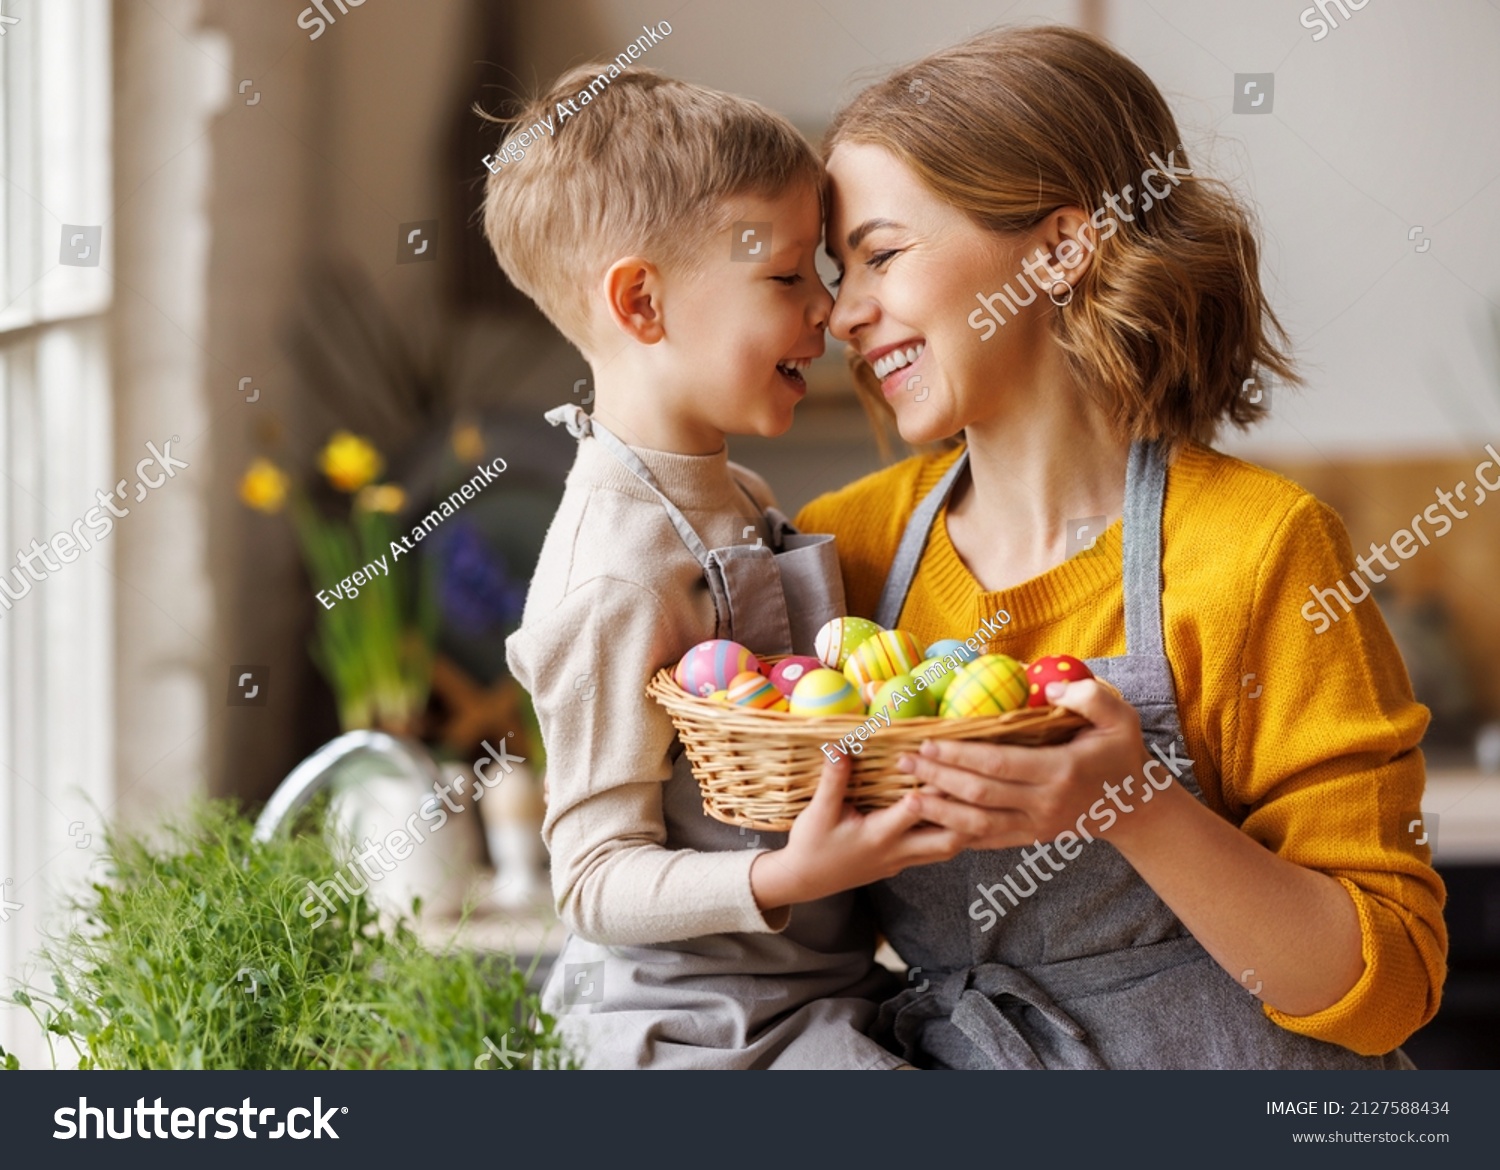 Sweet family portrait of happy mother and little son holding wicker basket full of painted multi-colored Easter eggs, tenderly embracing and smiling in cozy light kitchen at home, selective focus #2127588434